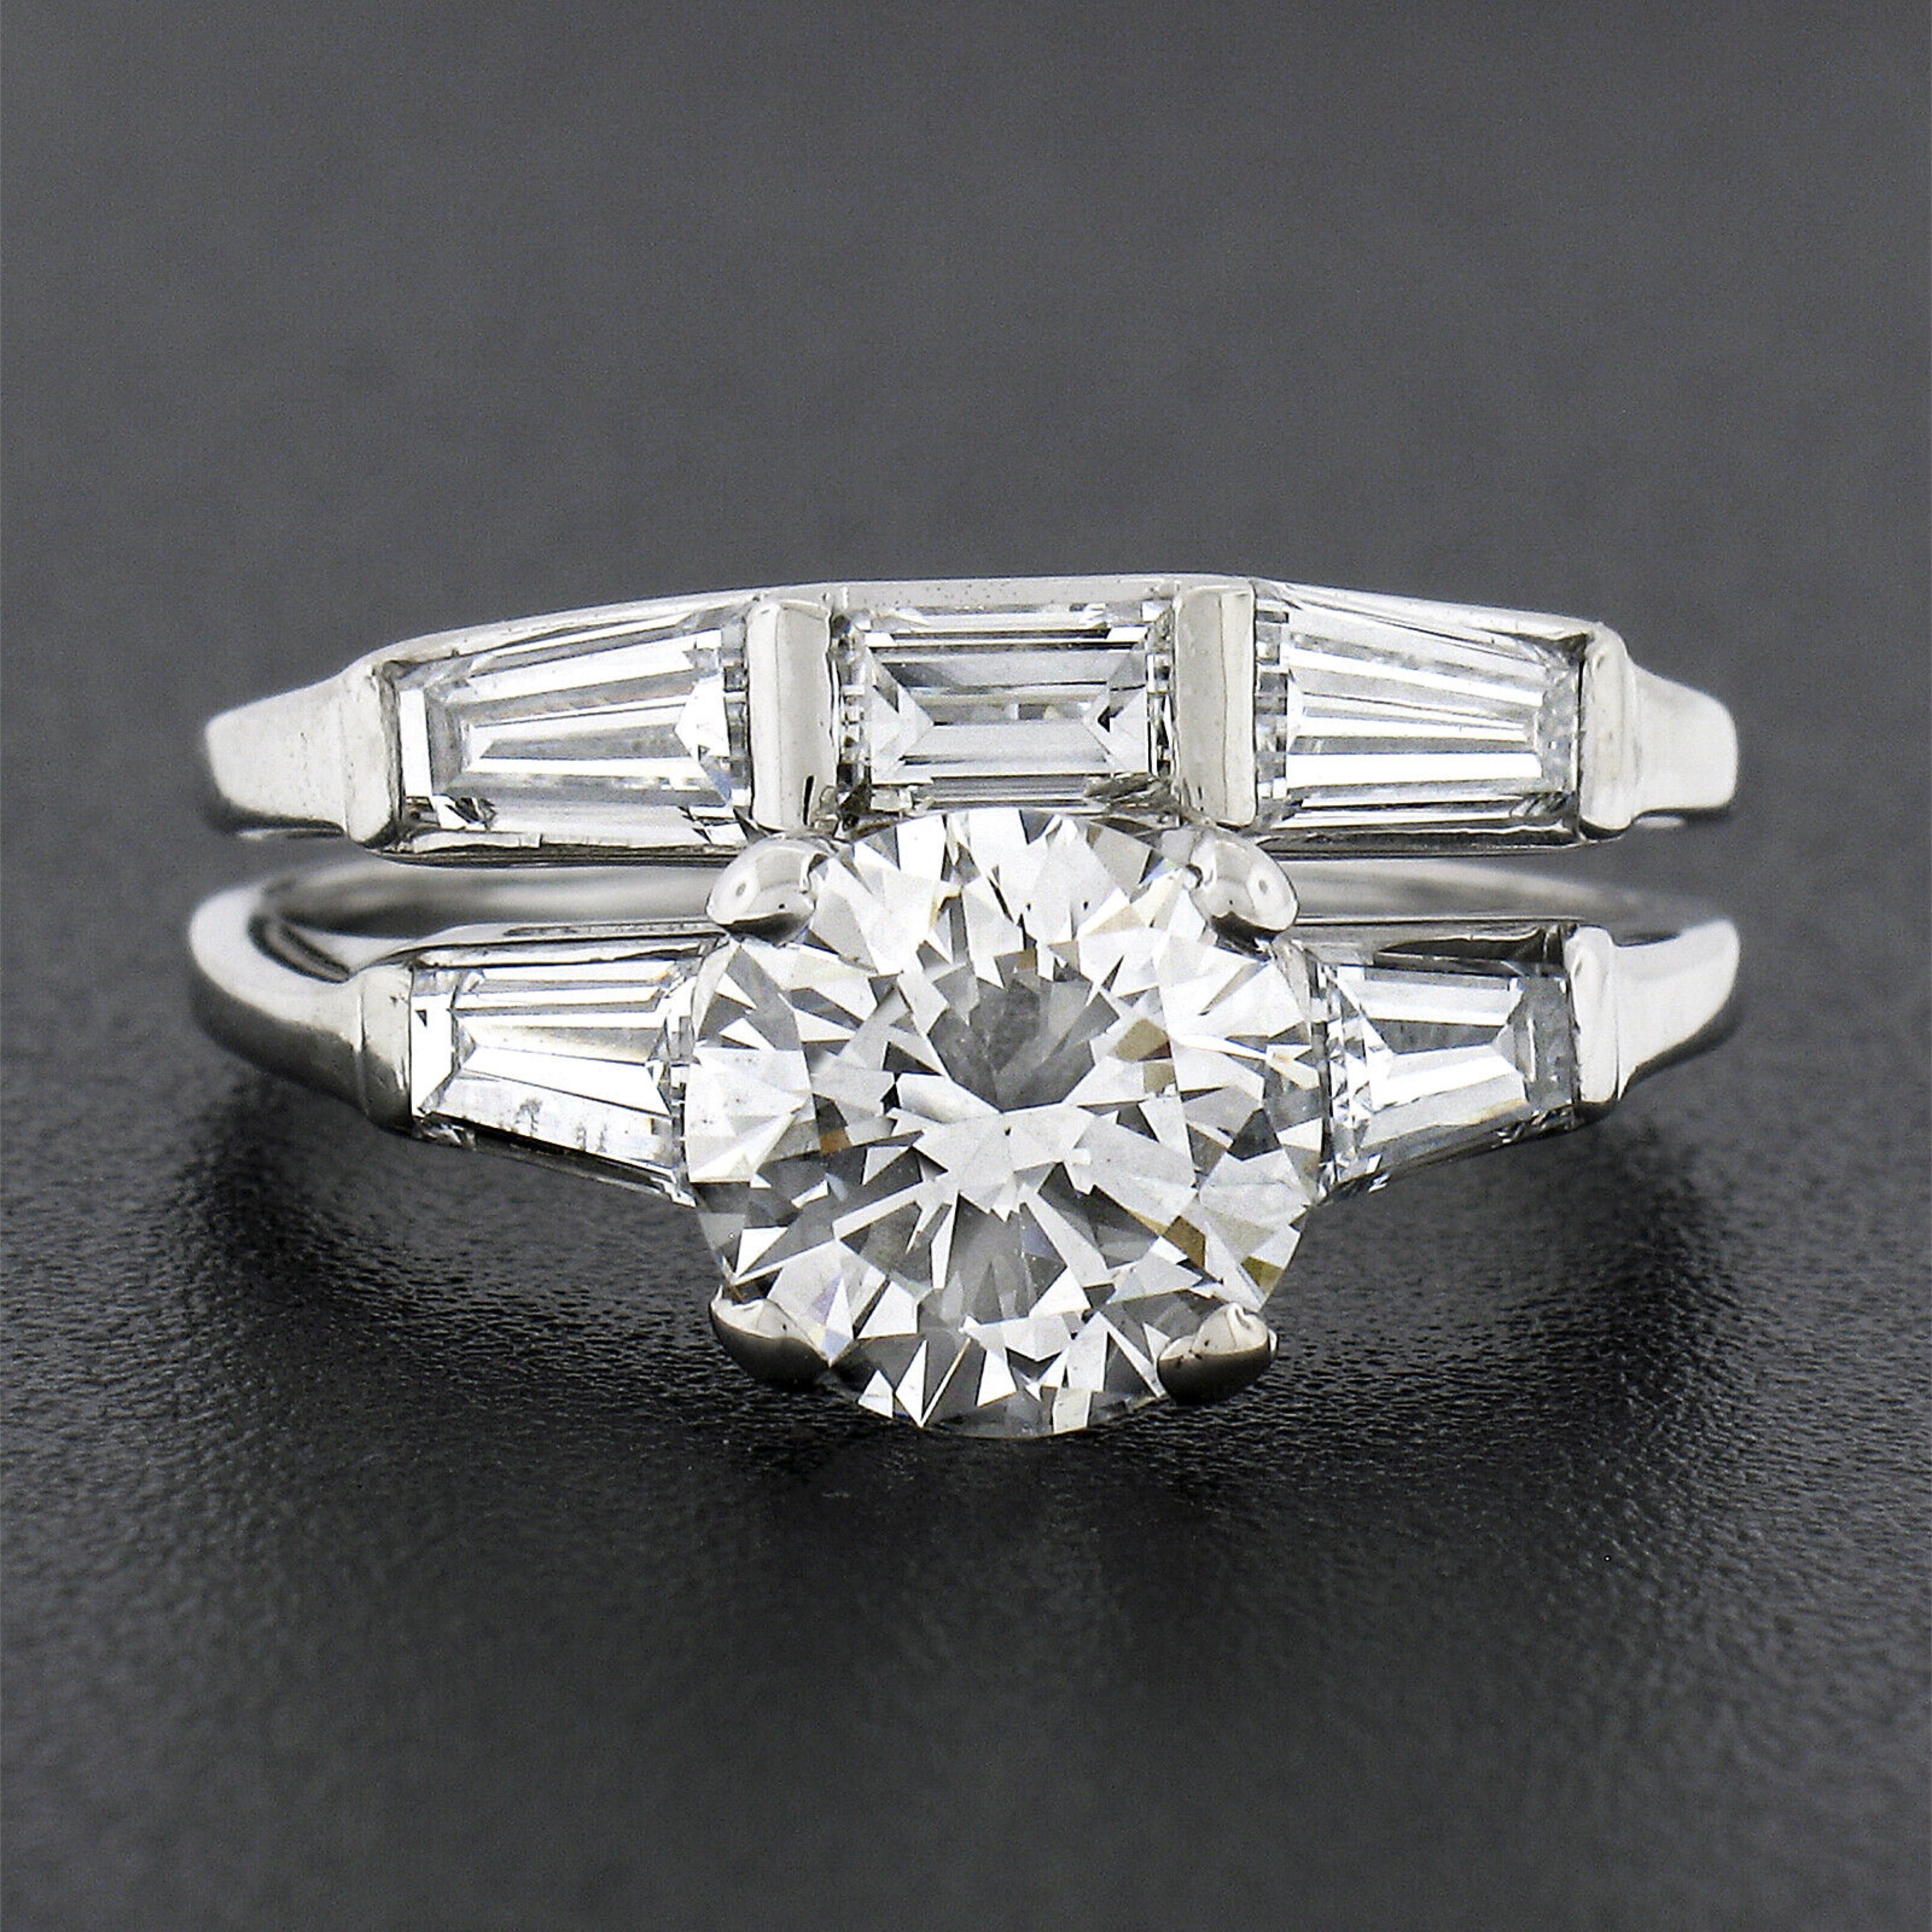 This absolutely magnificent vintage diamond engagement ring and wedding band set was crafted from solid 14k white gold. The engagement ring features a stunning, GIA certified, round brilliant diamond solitaire neatly prong set at the center with two